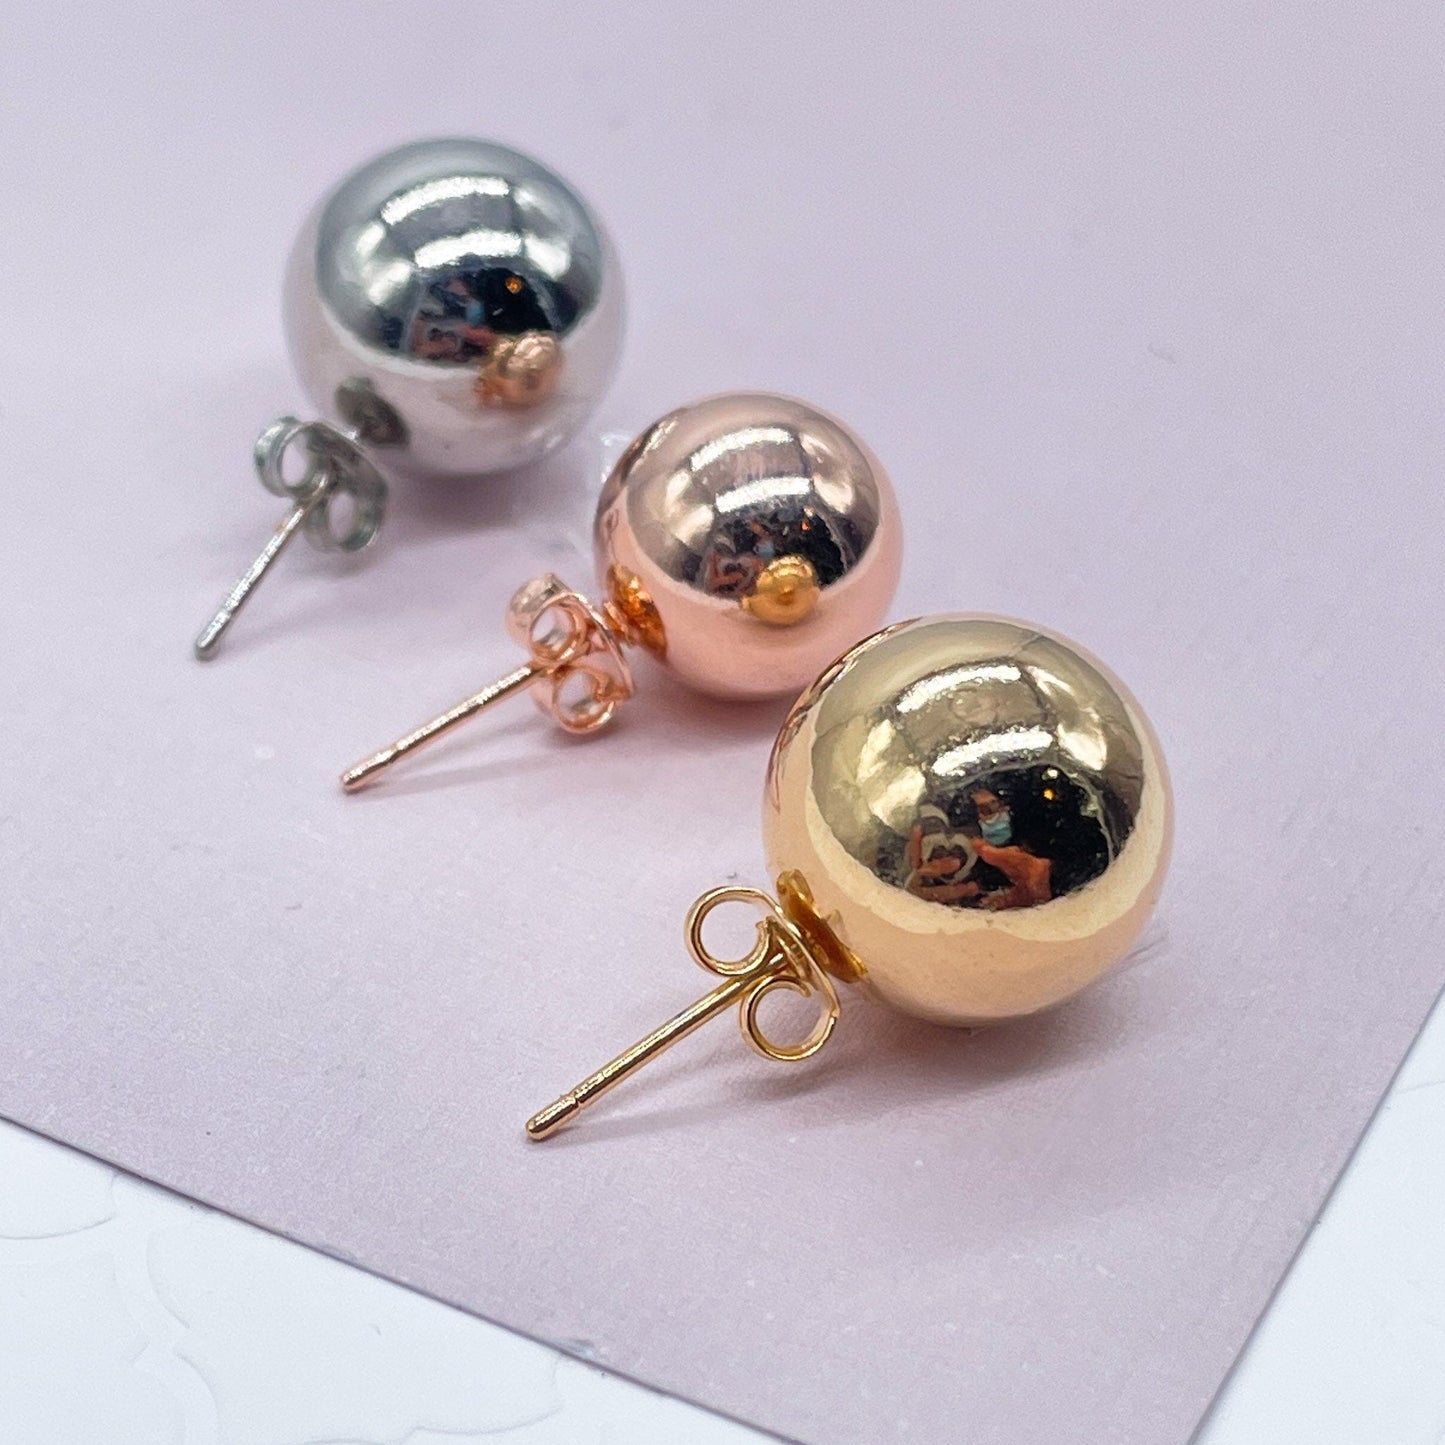 18k Gold Layered 14mm Ball Stud Earrings Available in Gold, Rose Gold and